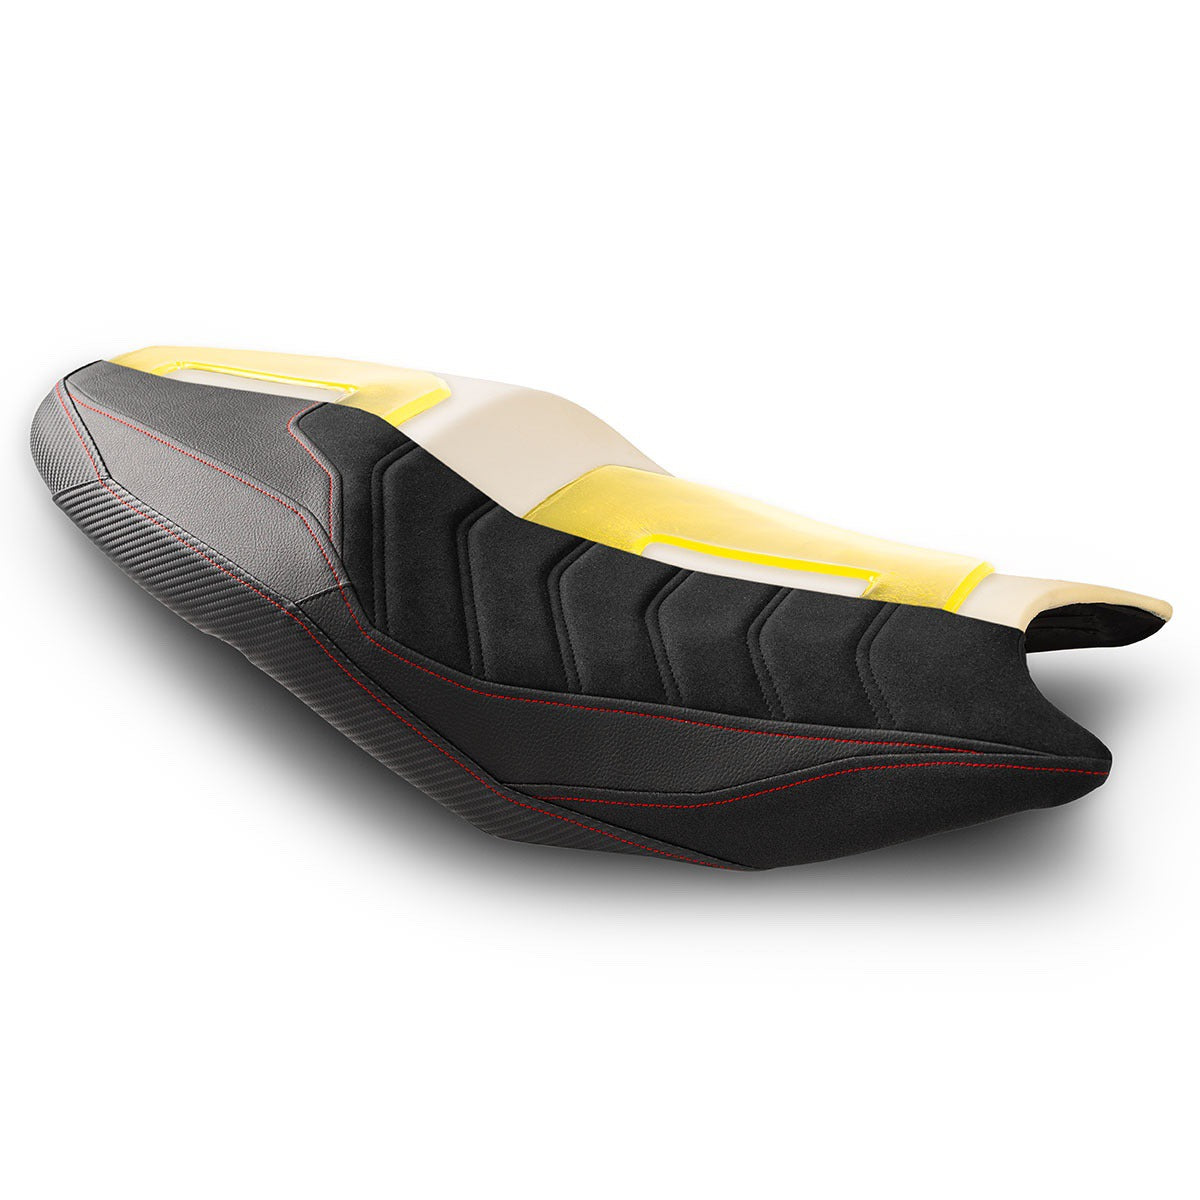 Cross-section of motorcycle seat with Luimoto rider seat cover on top and Gold Gel R underneath